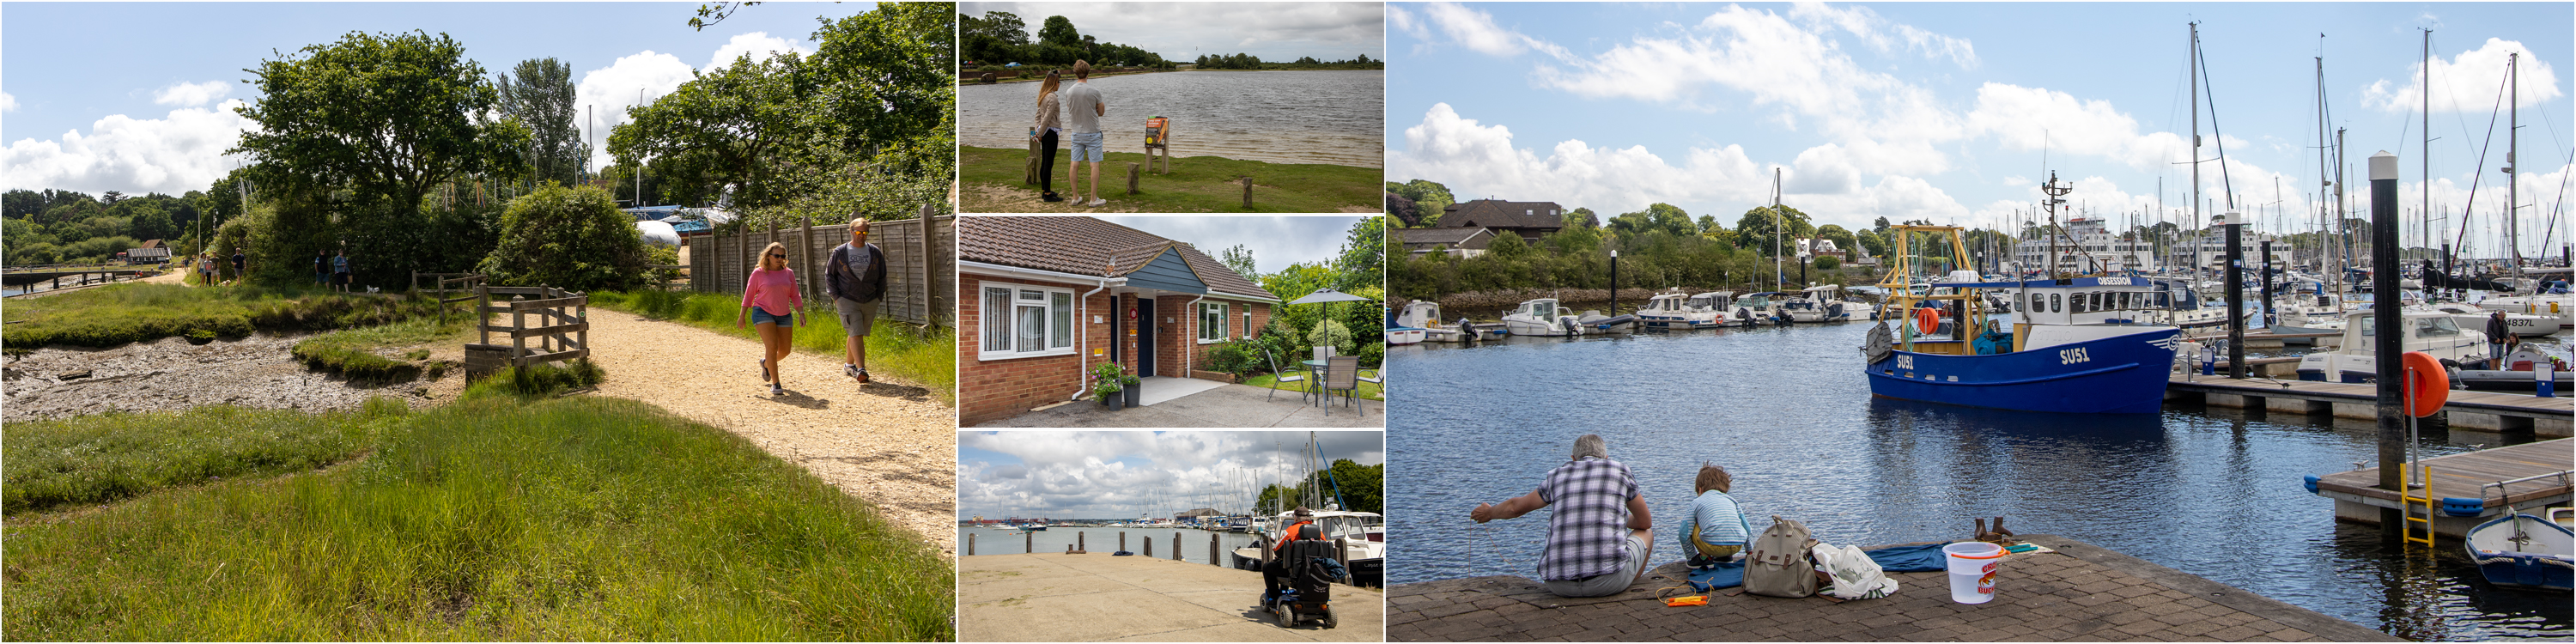 Contact us at Our Bench - New Forest Accessible Accommodation